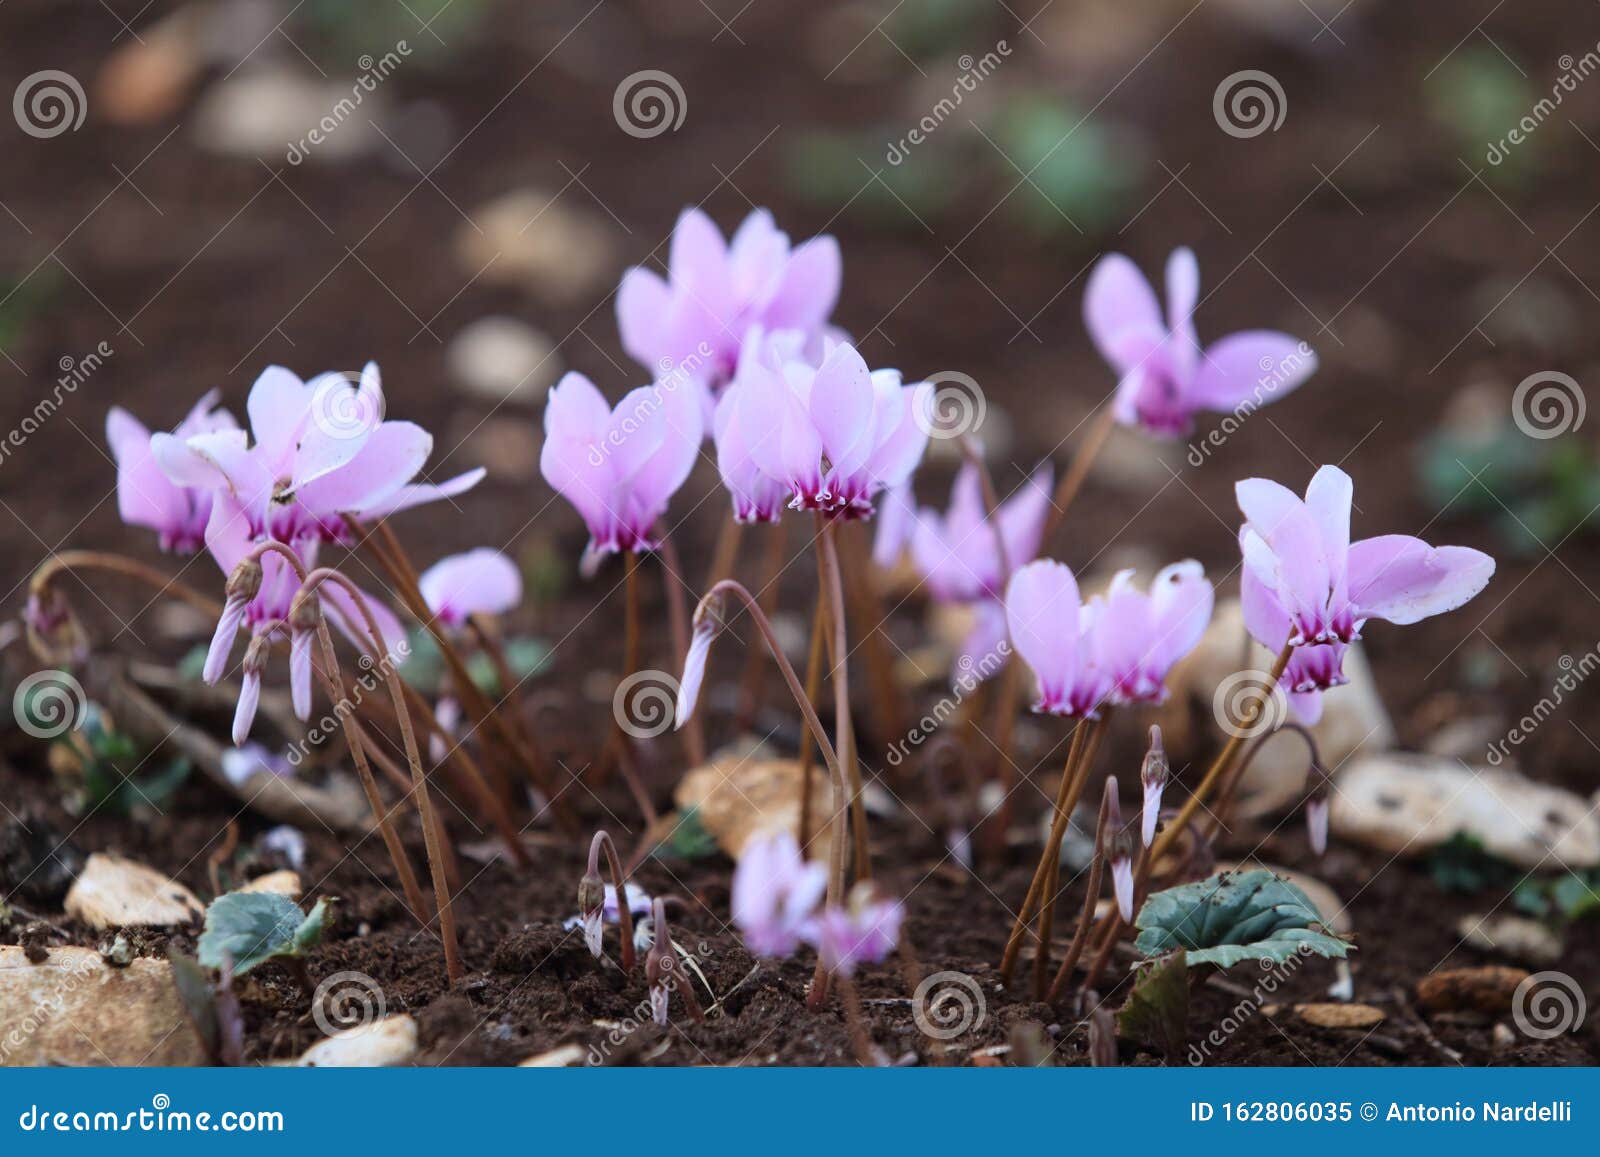 a small group of wild purple cyclamens